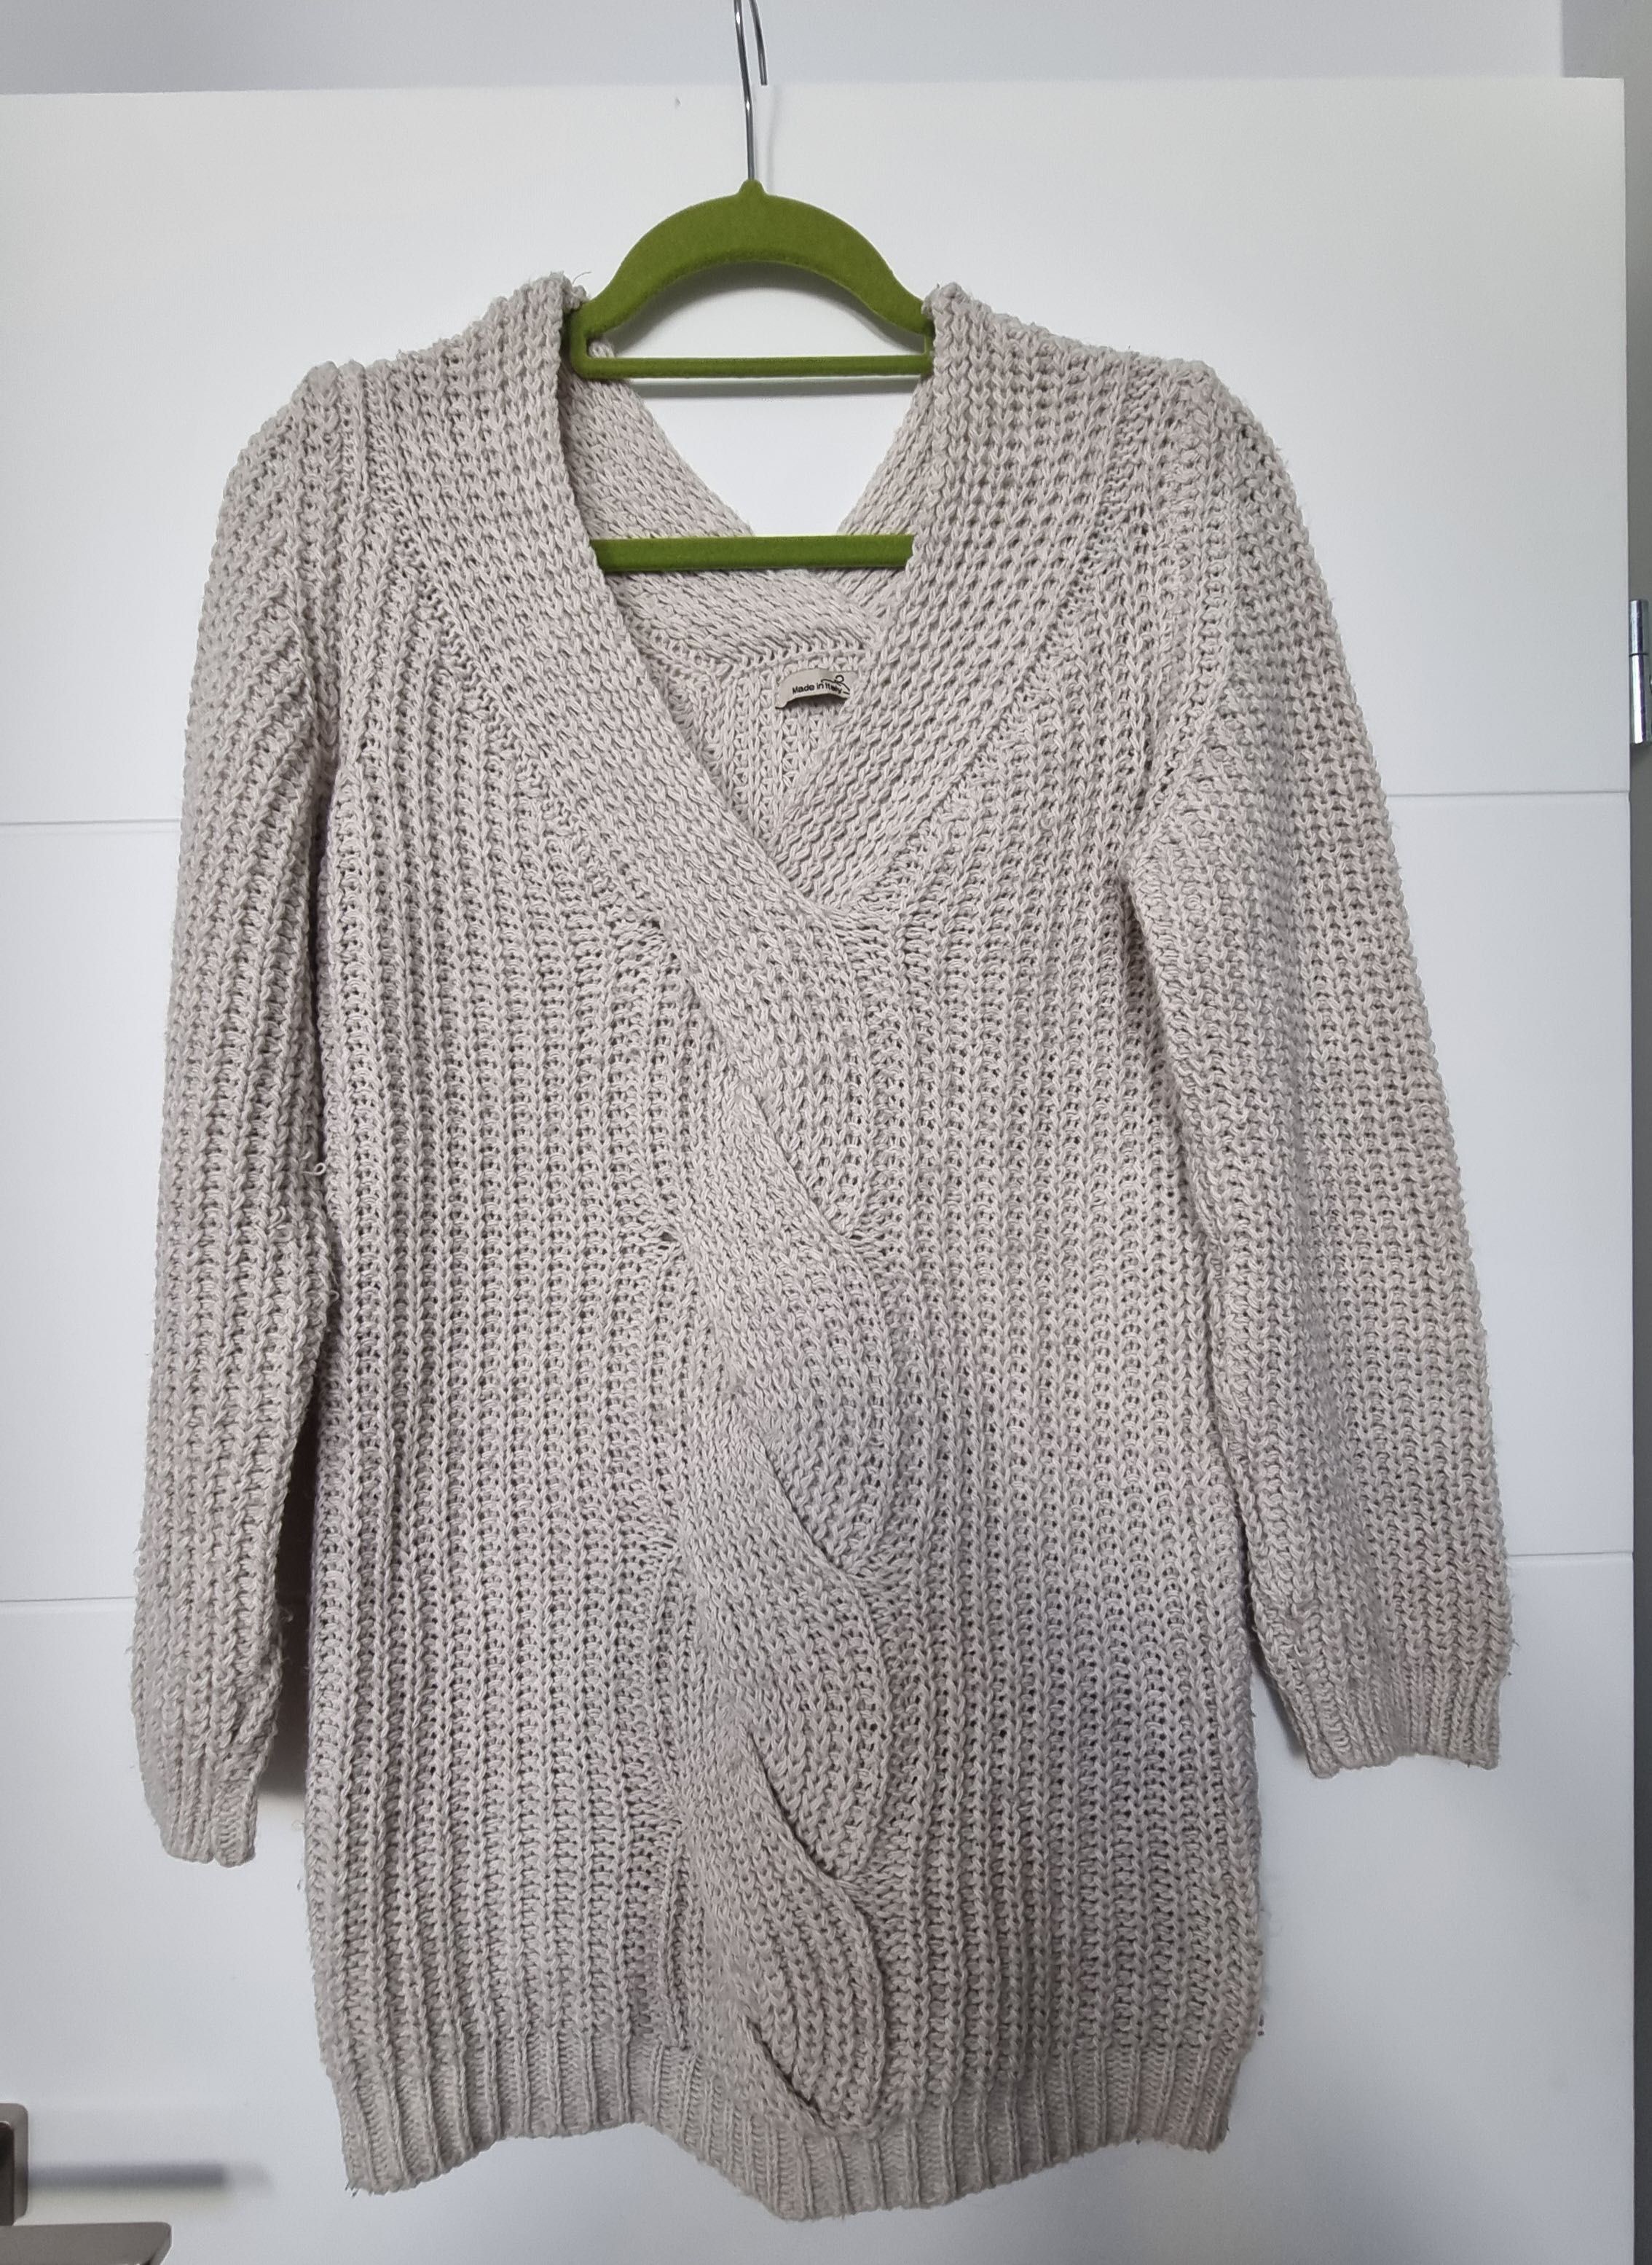 Sweter - Made in Italy - rozmiar 38